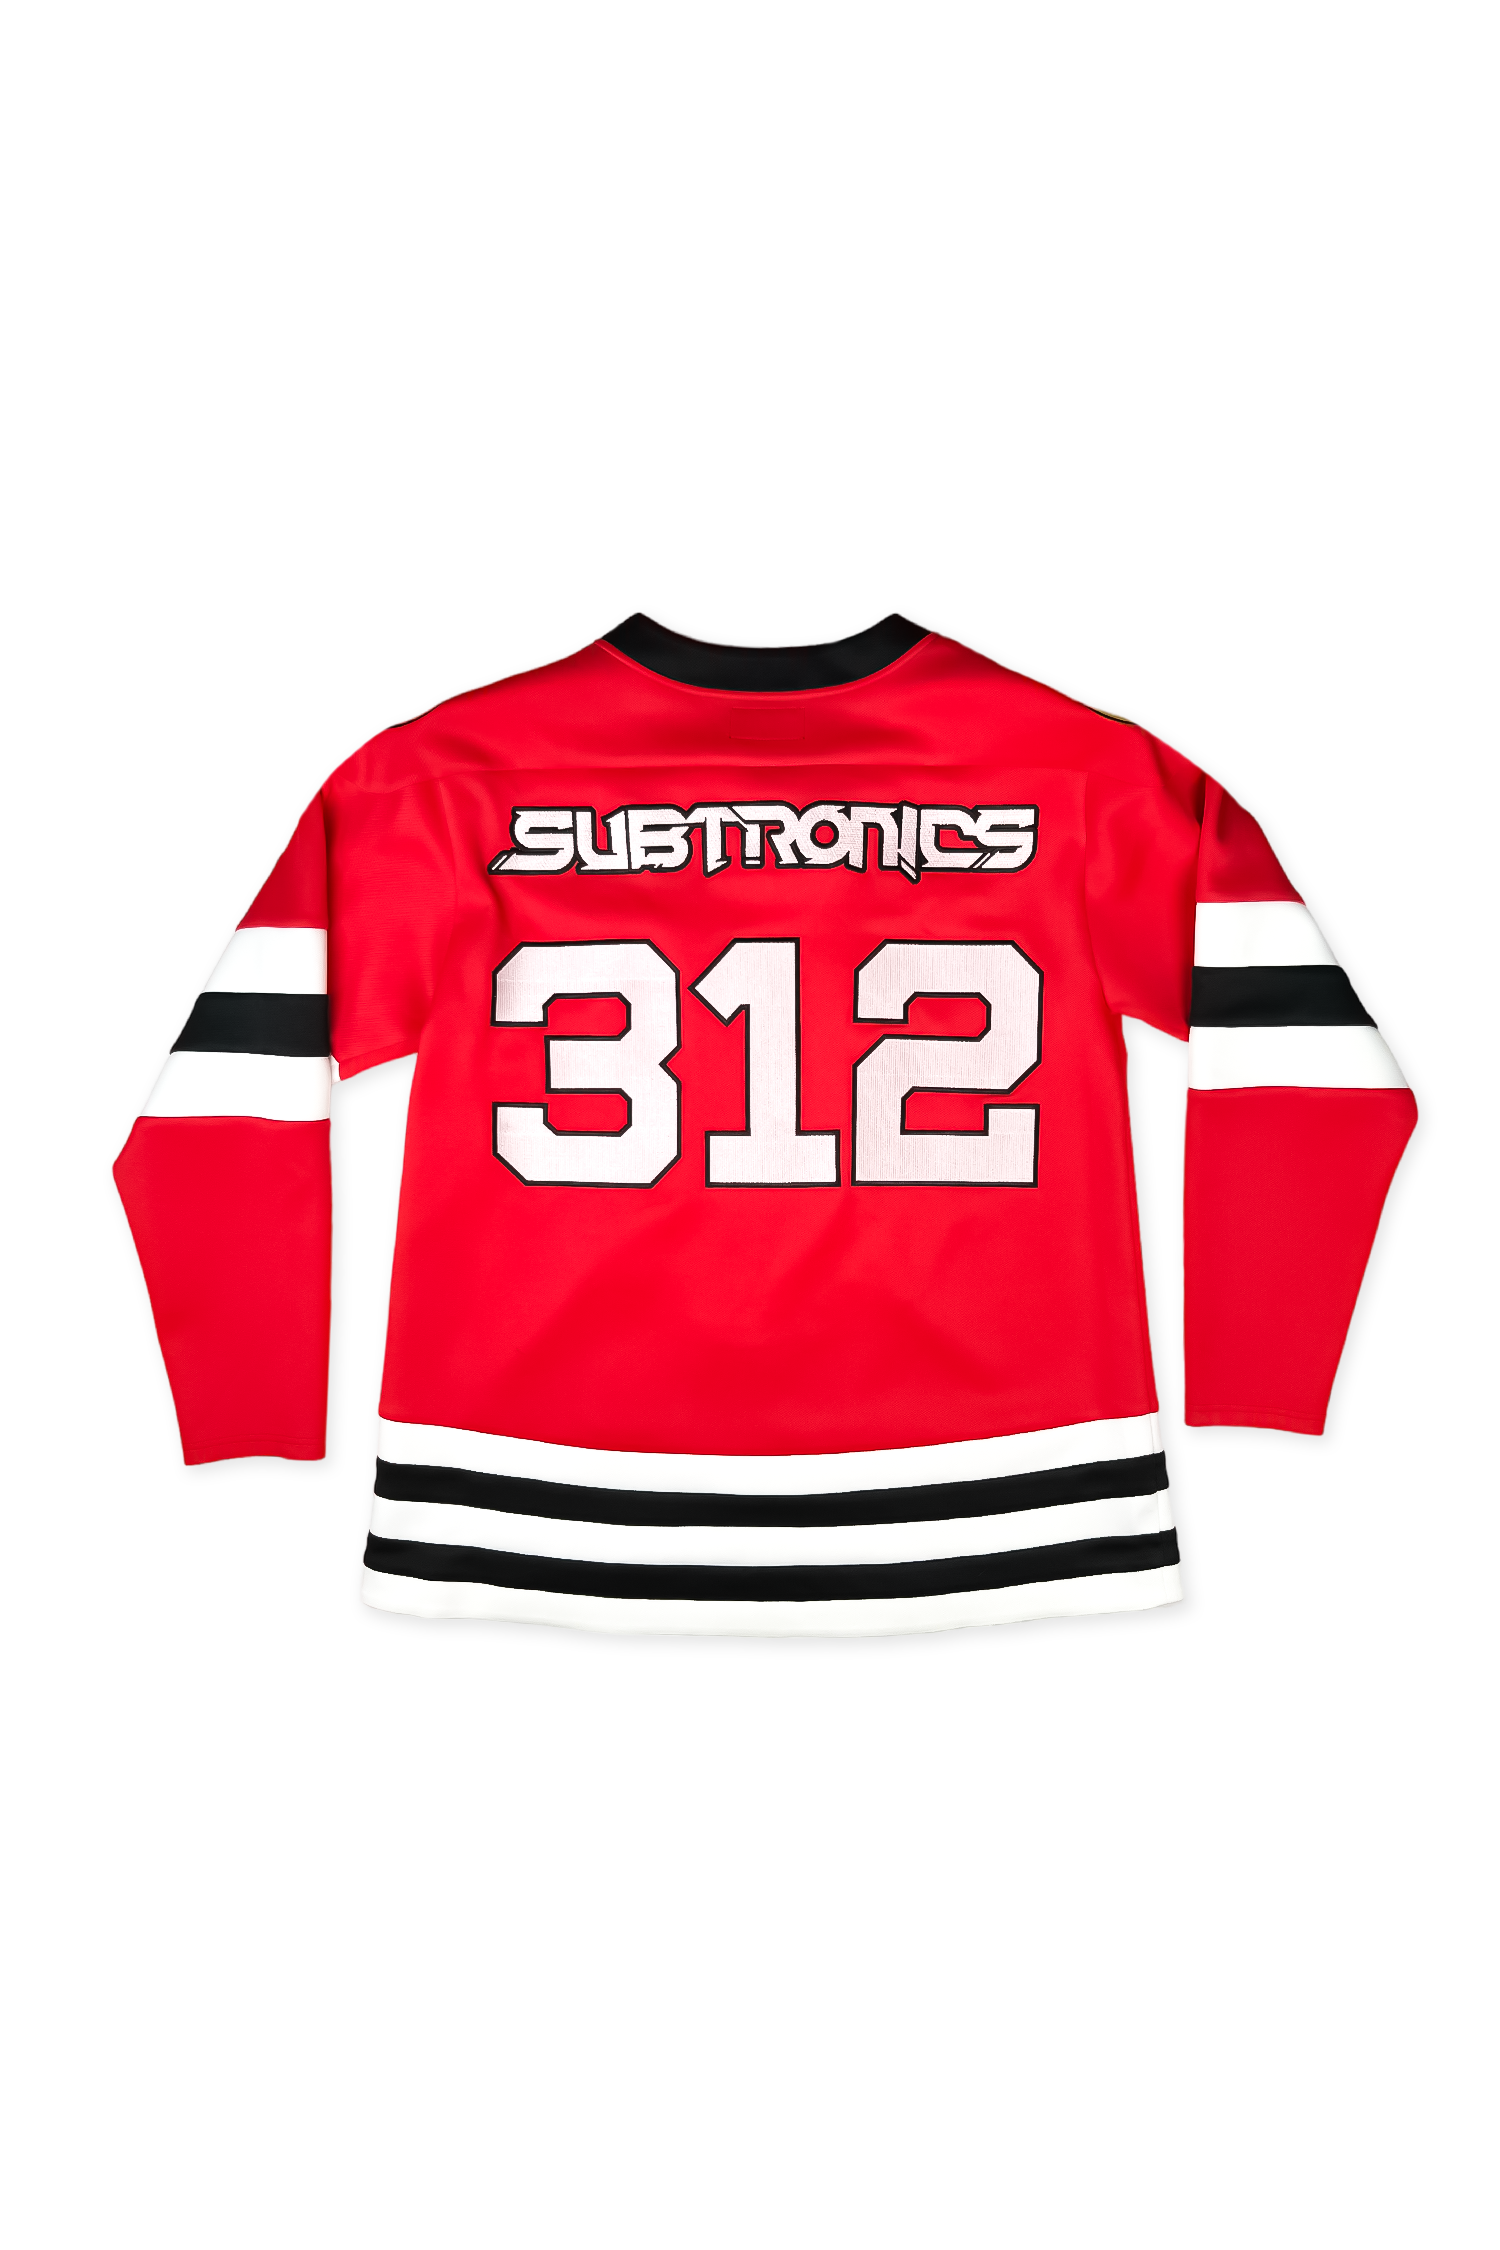 Subtronics - Chicago Event - Official Hockey Jersey